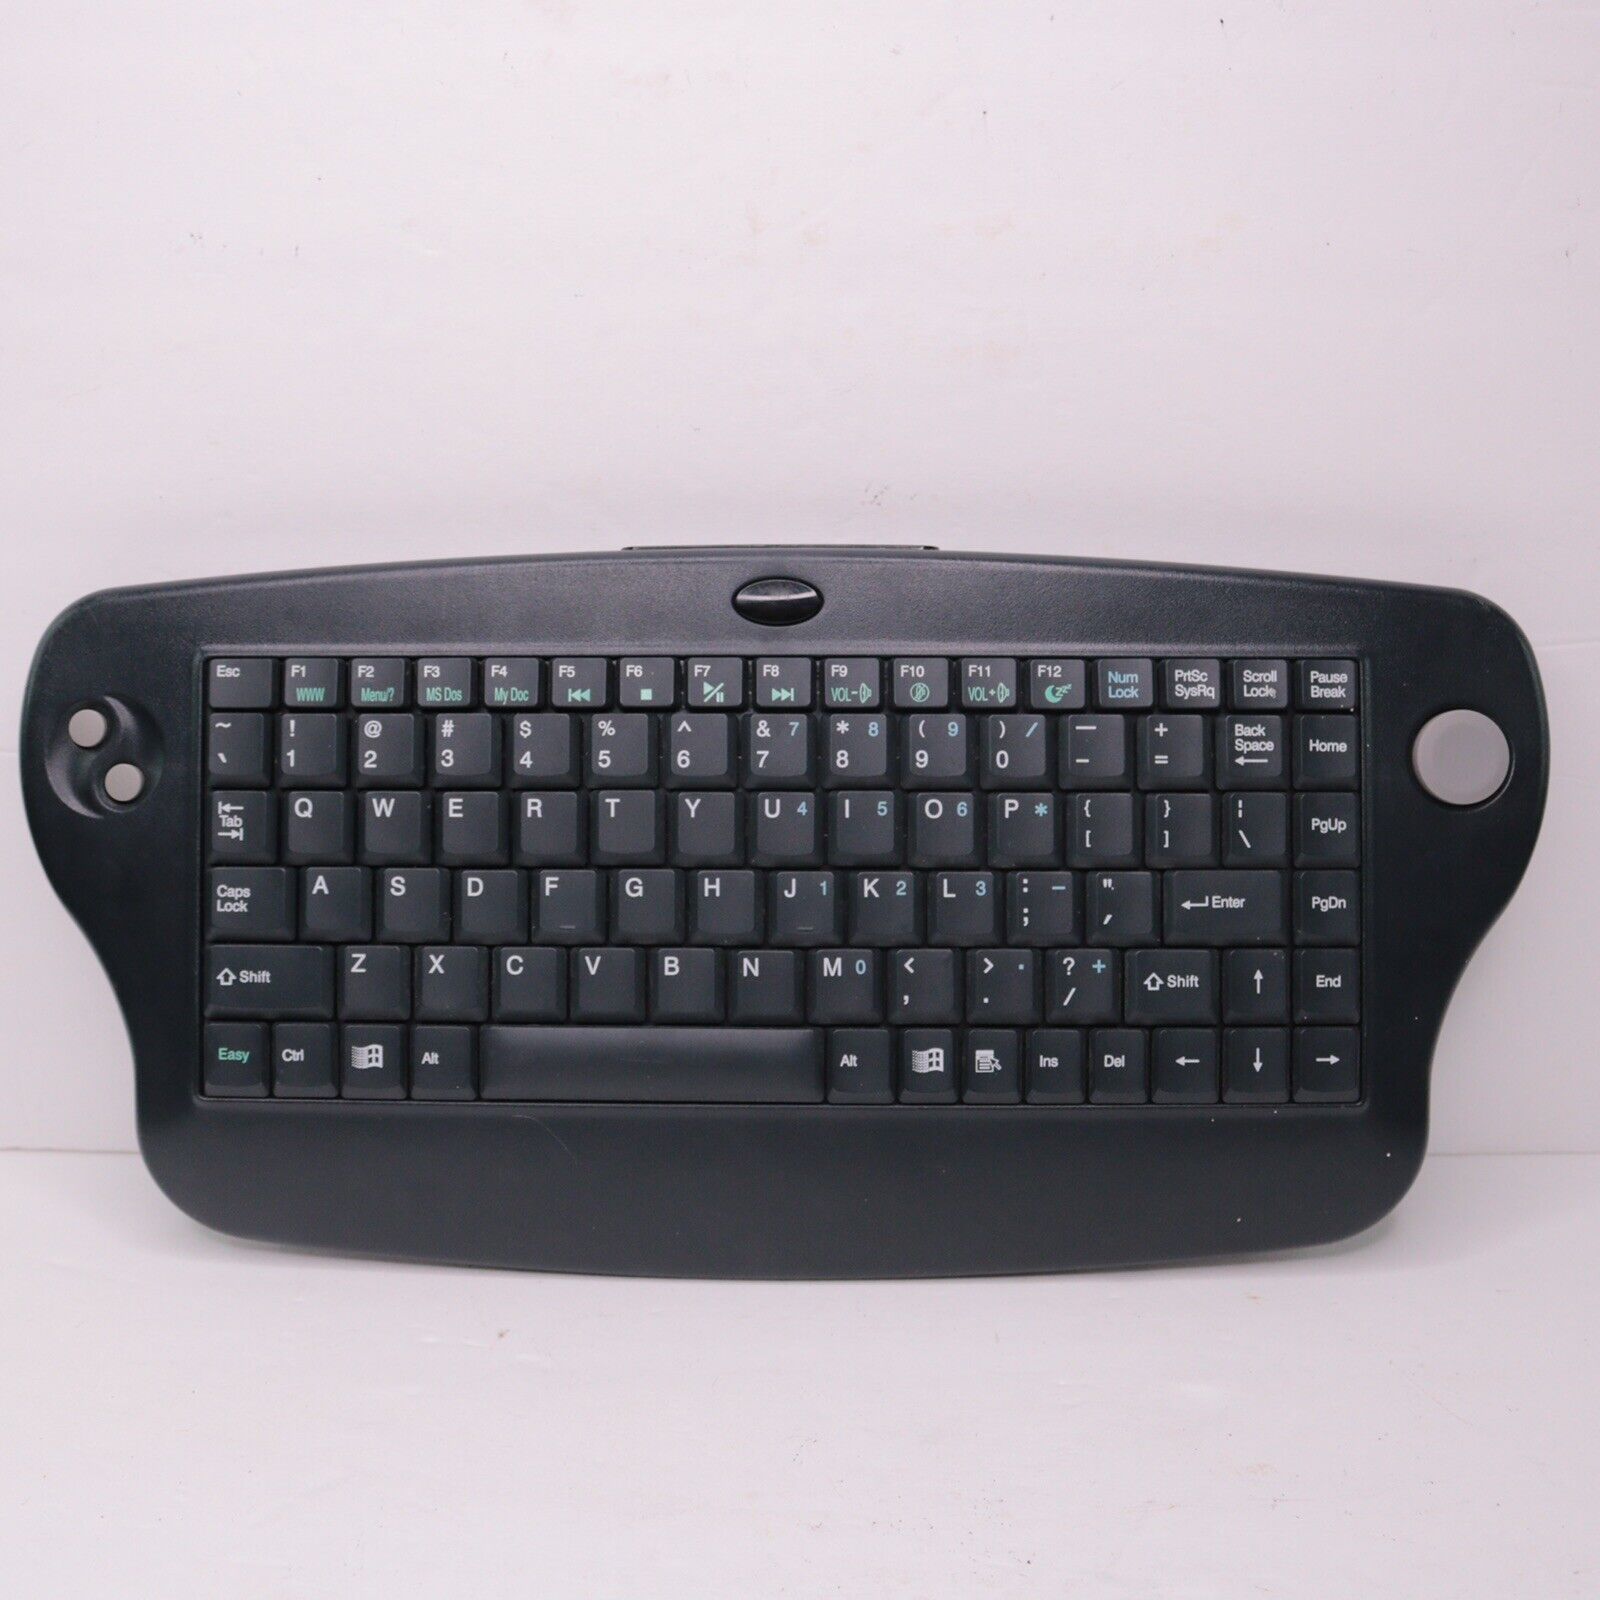 CHICONY KB-9820 WIRELESS KEYBOARD NO RECEIVER READ BUILT-IN ANALOG TOGGLE